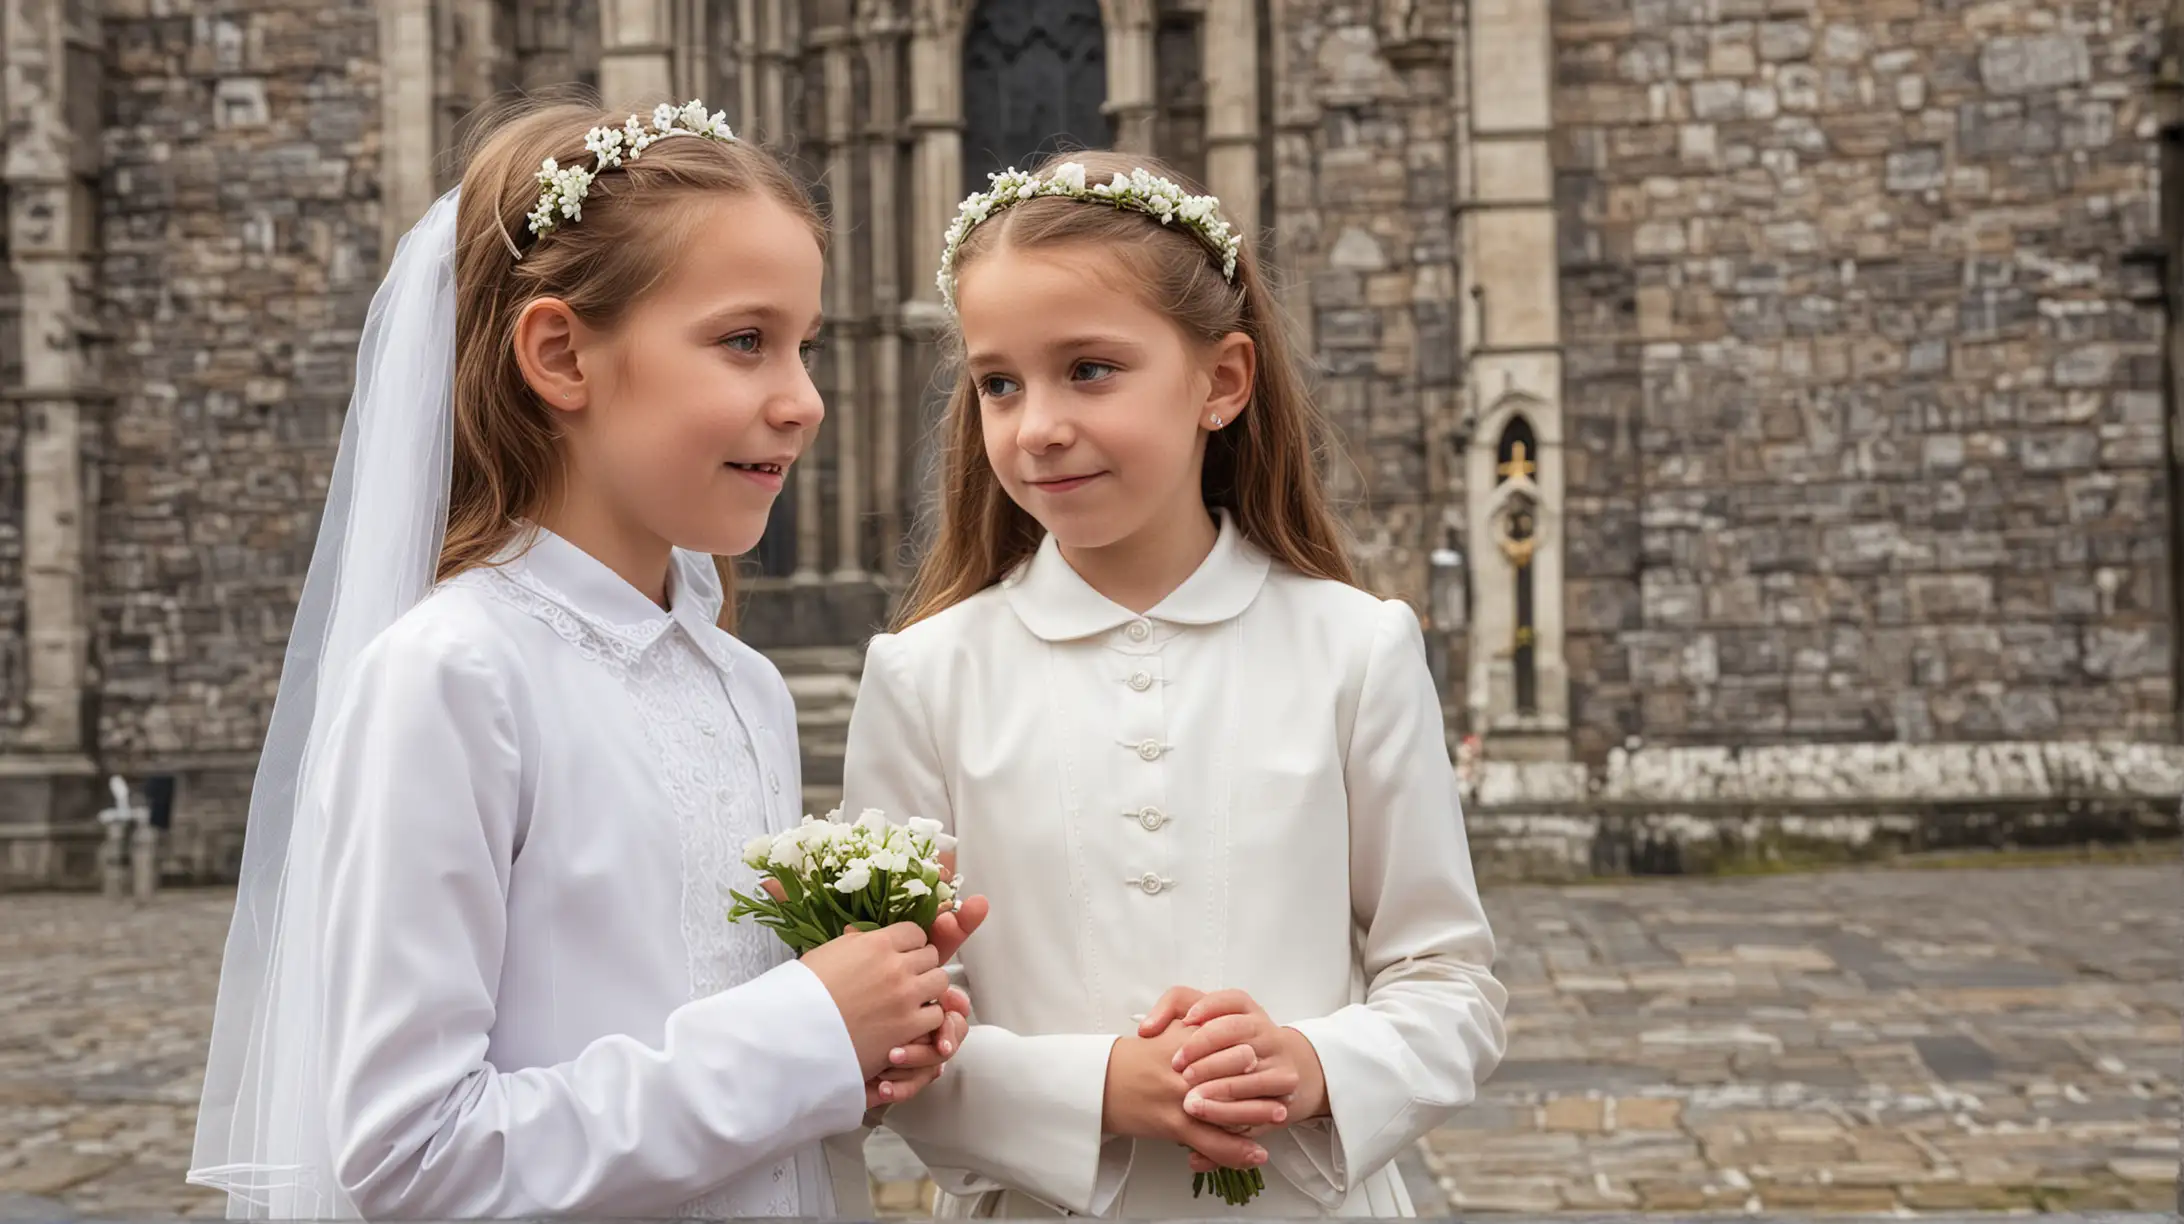 girl  holy communion day
in front of a cathedral in Ireland 